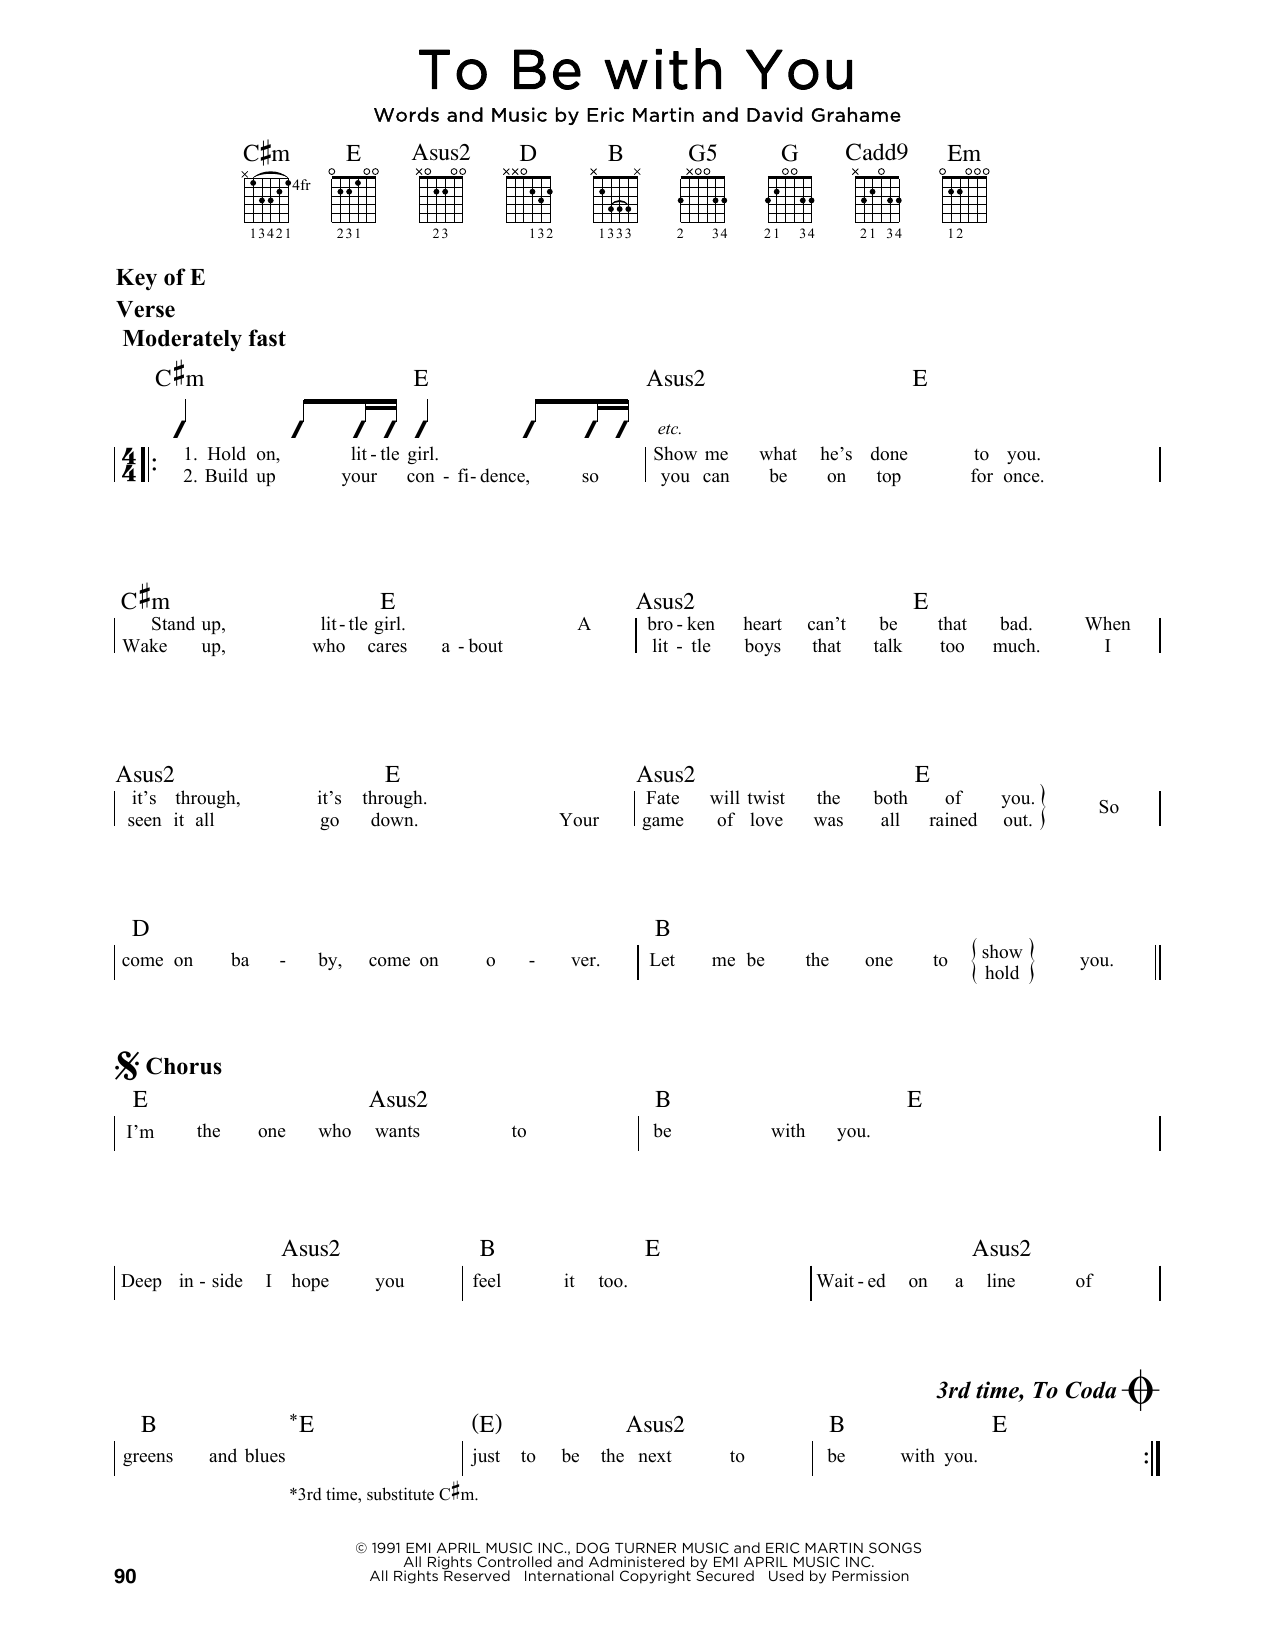 Download Mr. Big To Be With You Sheet Music